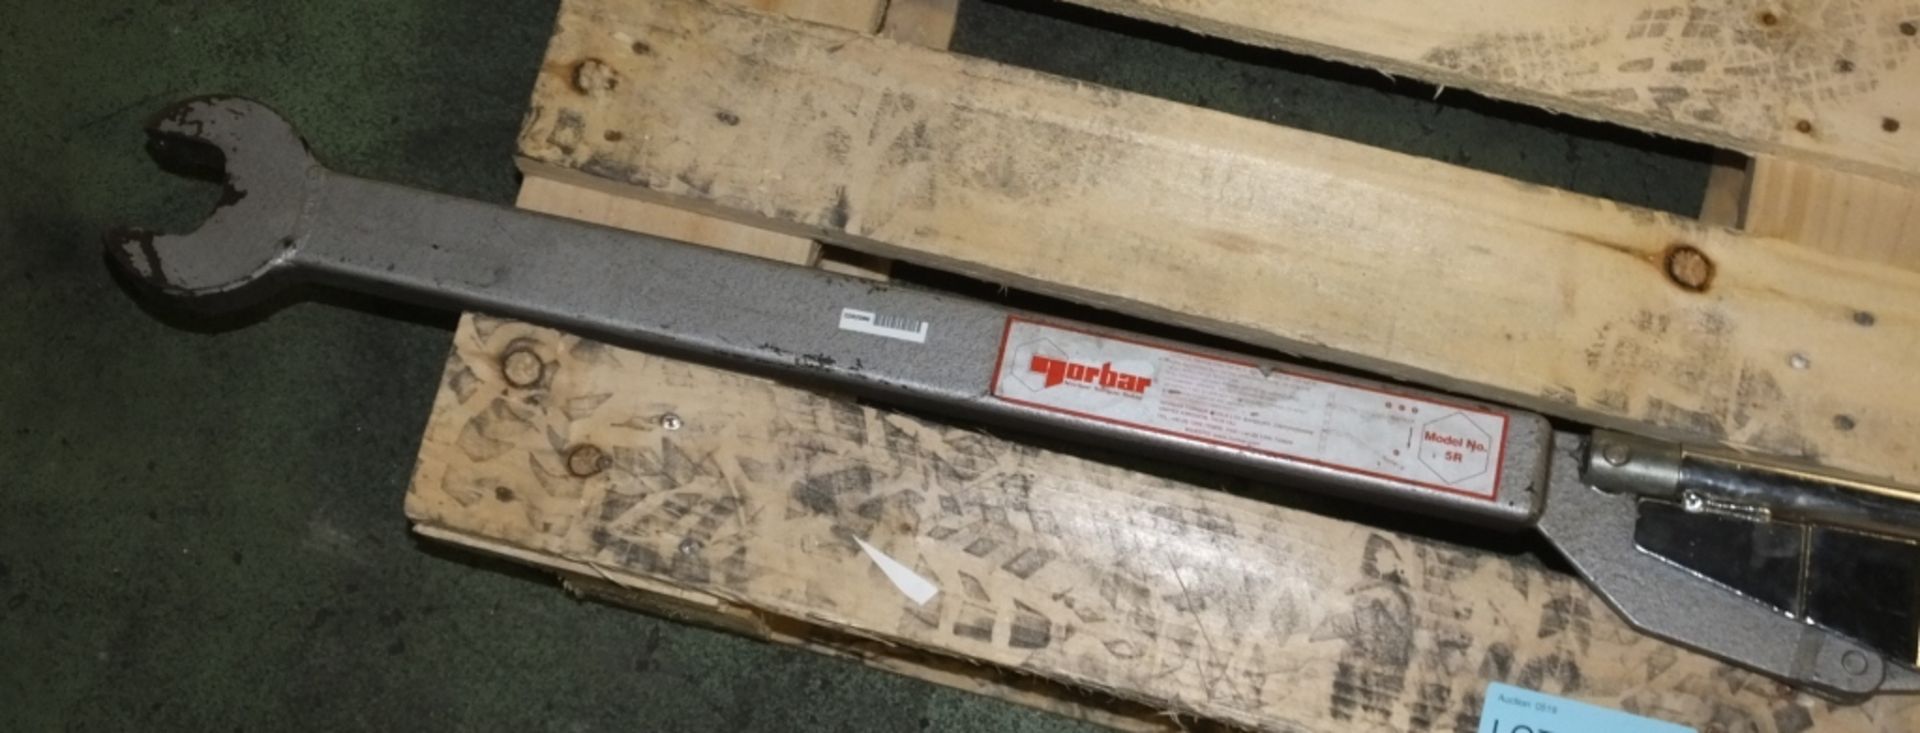 Norbar 5R Torque Wrench - Image 2 of 3